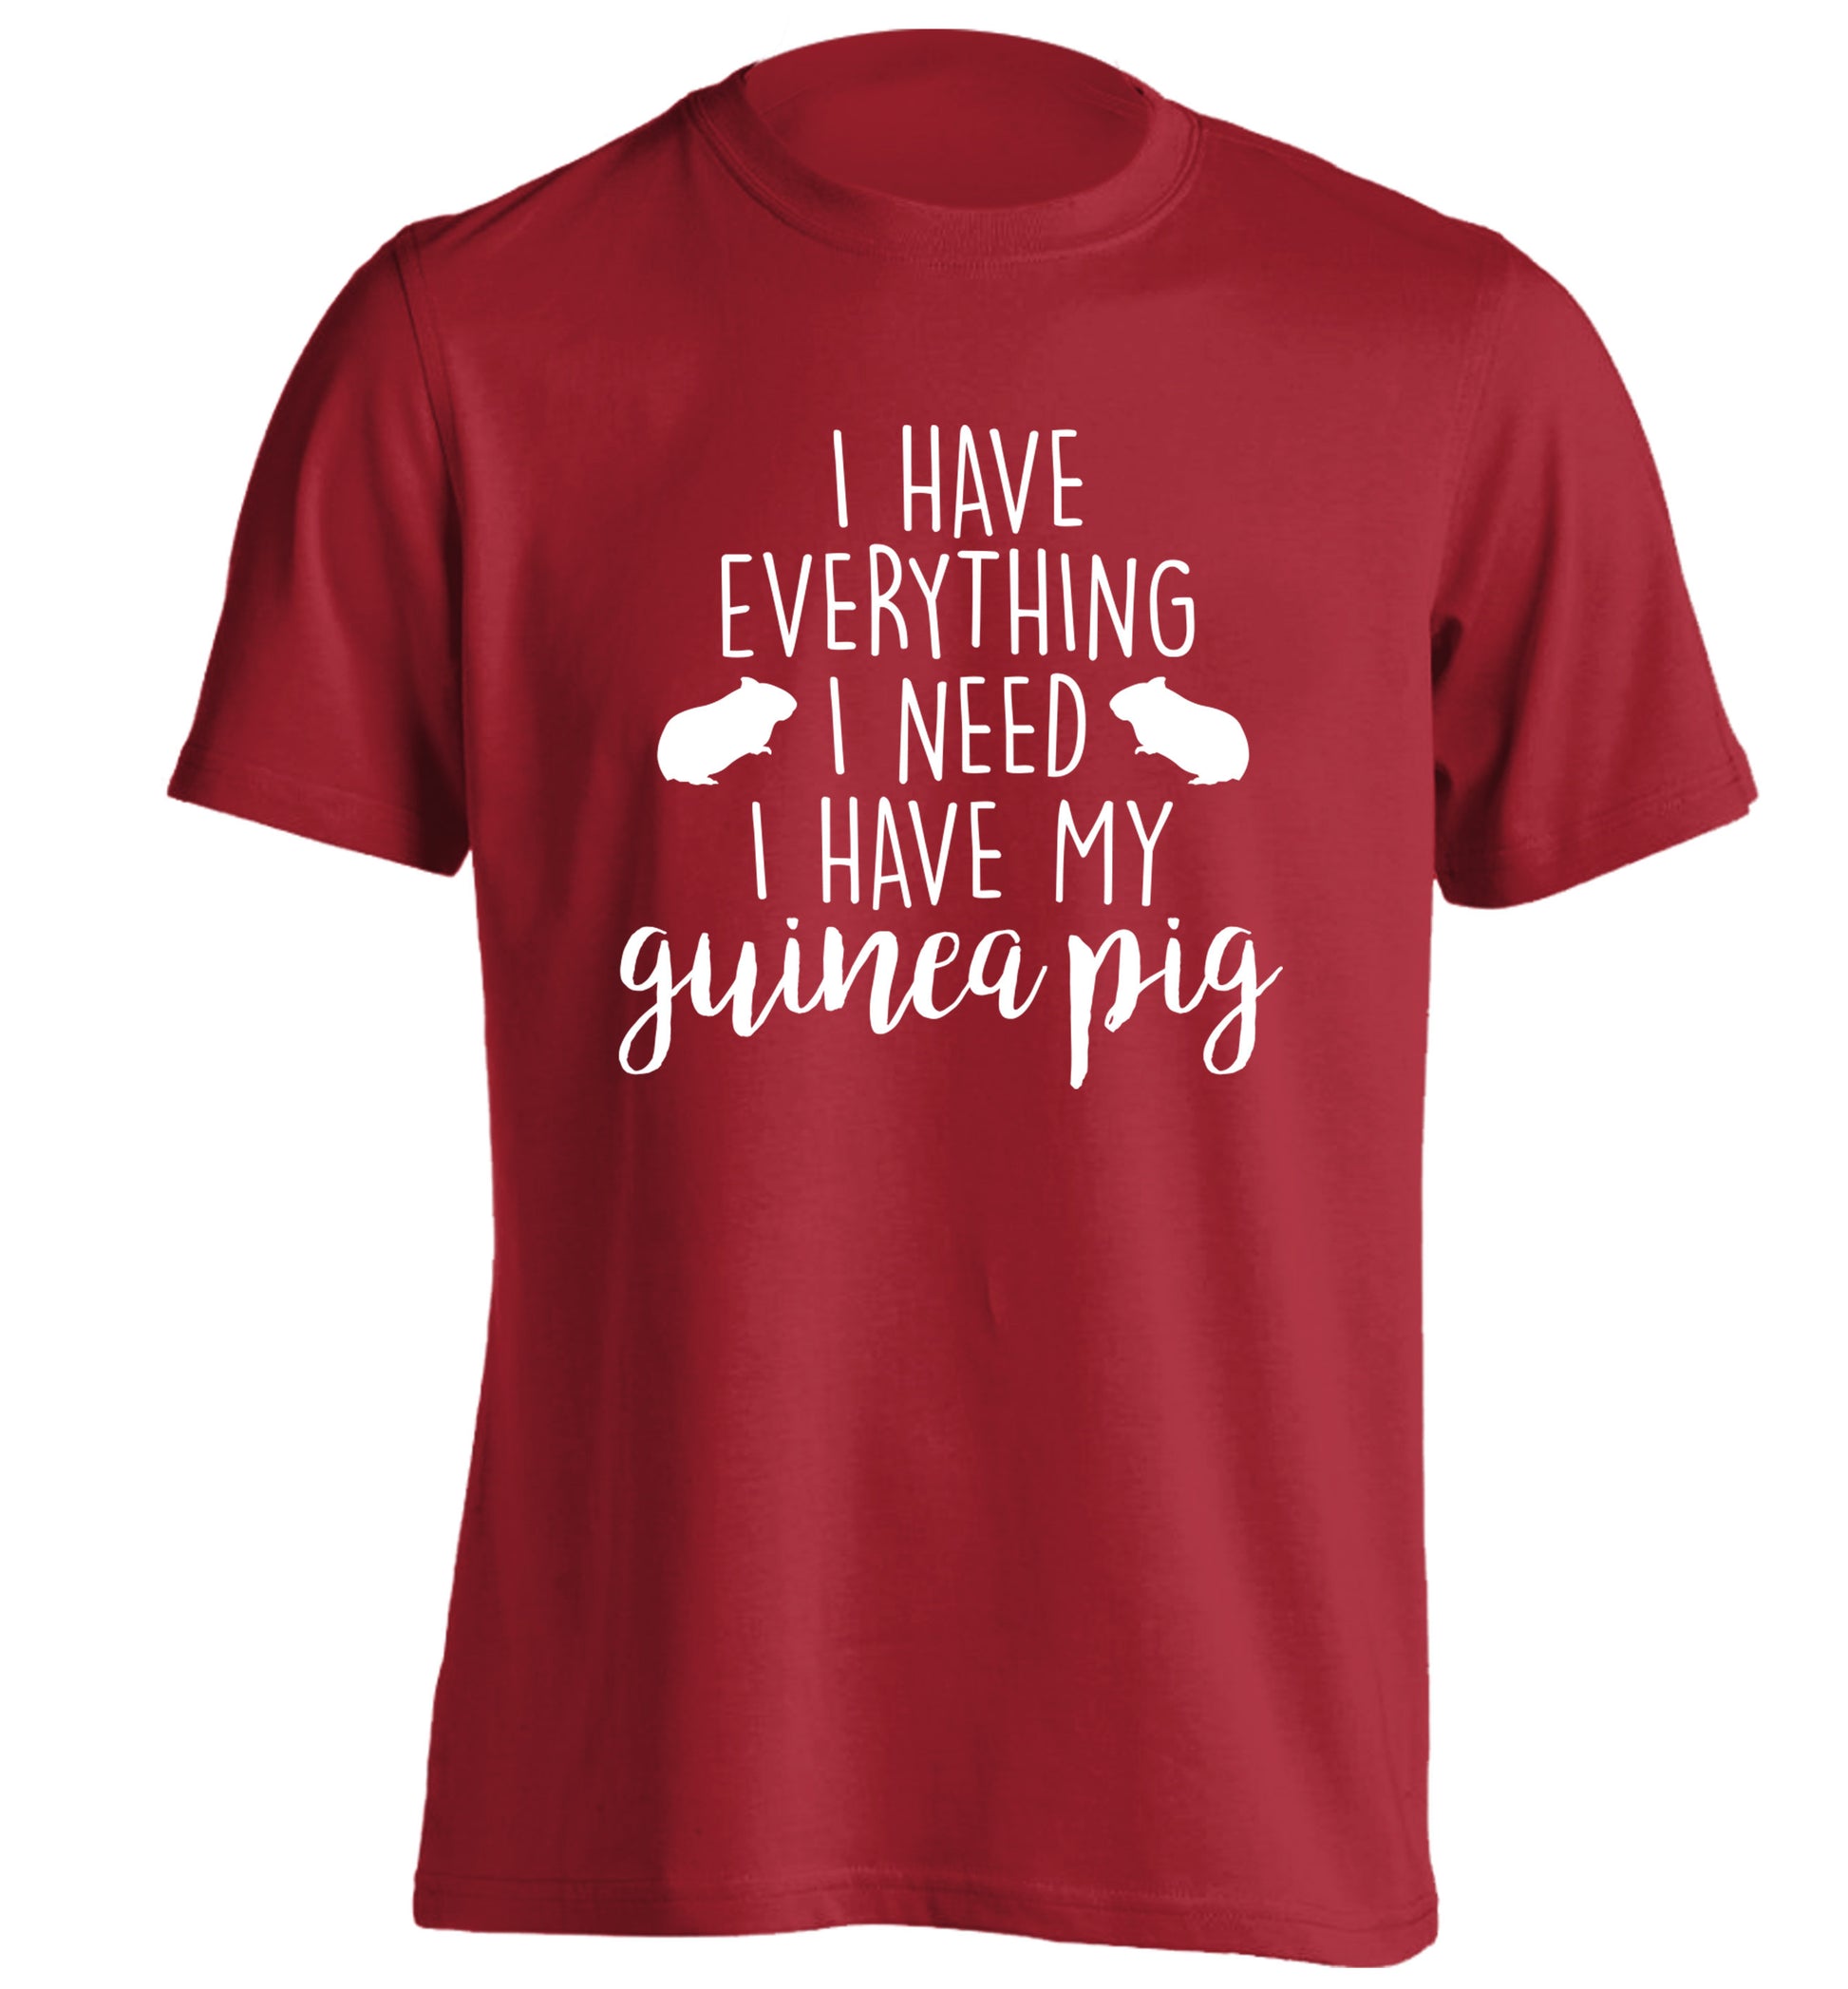 I have everything I need, I have my guinea pig adults unisex red Tshirt 2XL